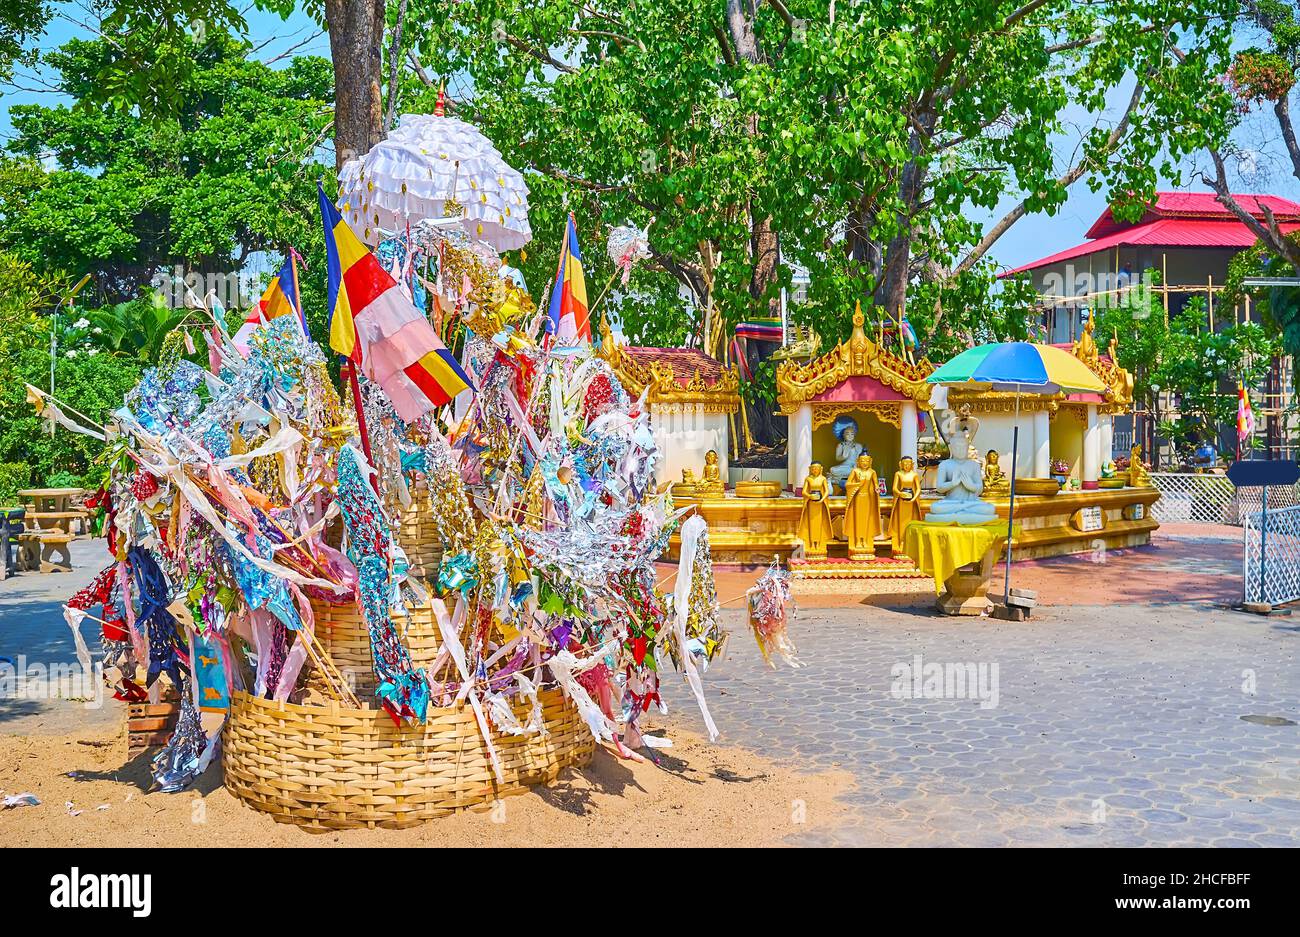 The courtyard of Wat Sai Moon Myanmar temple with sculptures around the Bodhi Tree and the small wicker wooden stupa (chedi) with colorful garlands, f Stock Photo